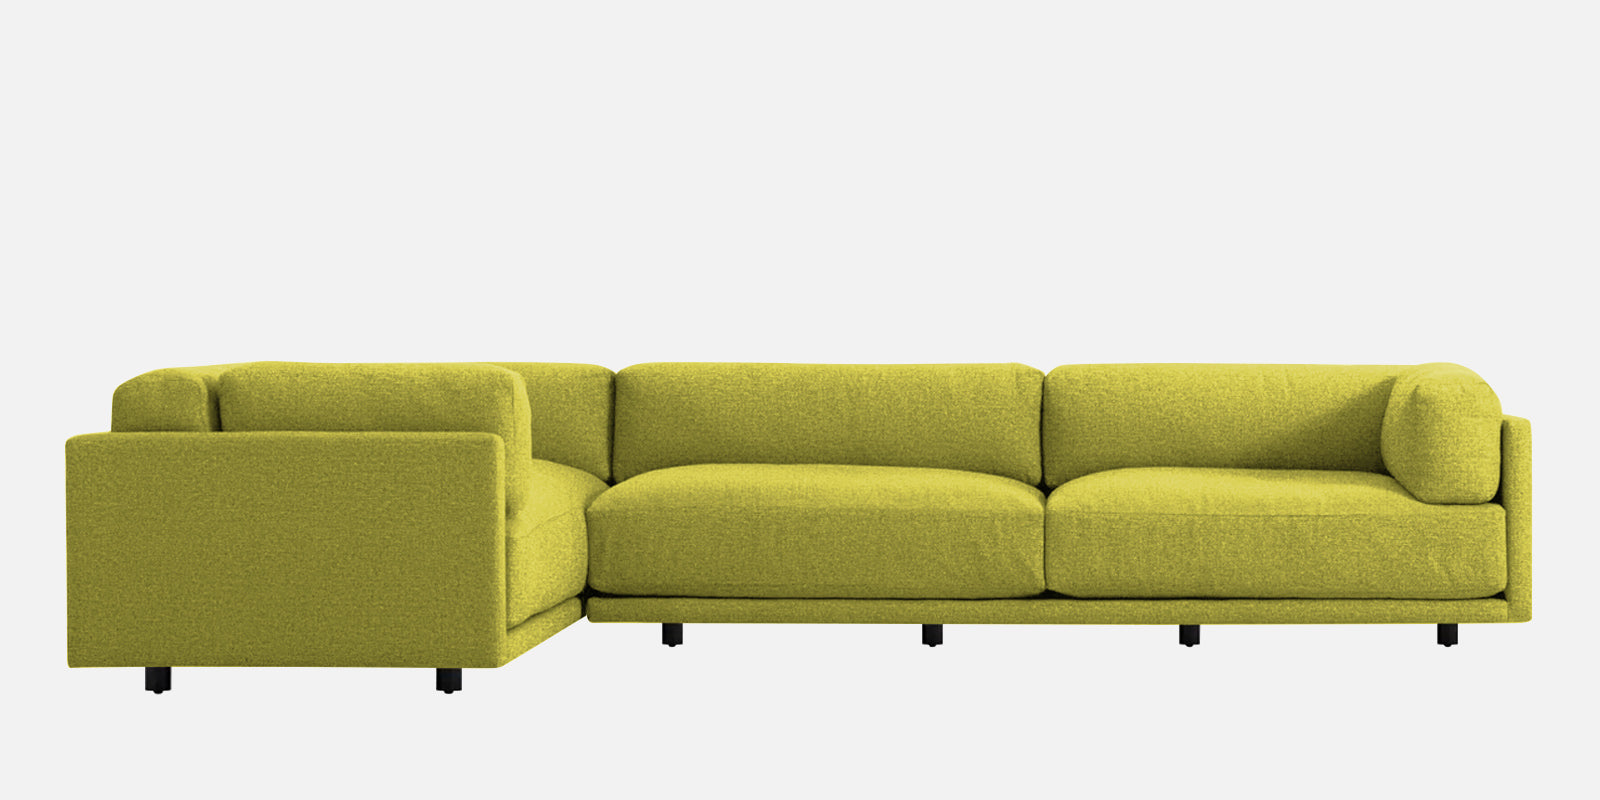 Nixon Fabric 6 Seater RHS Sectional Sofa In Parrot Green Colour